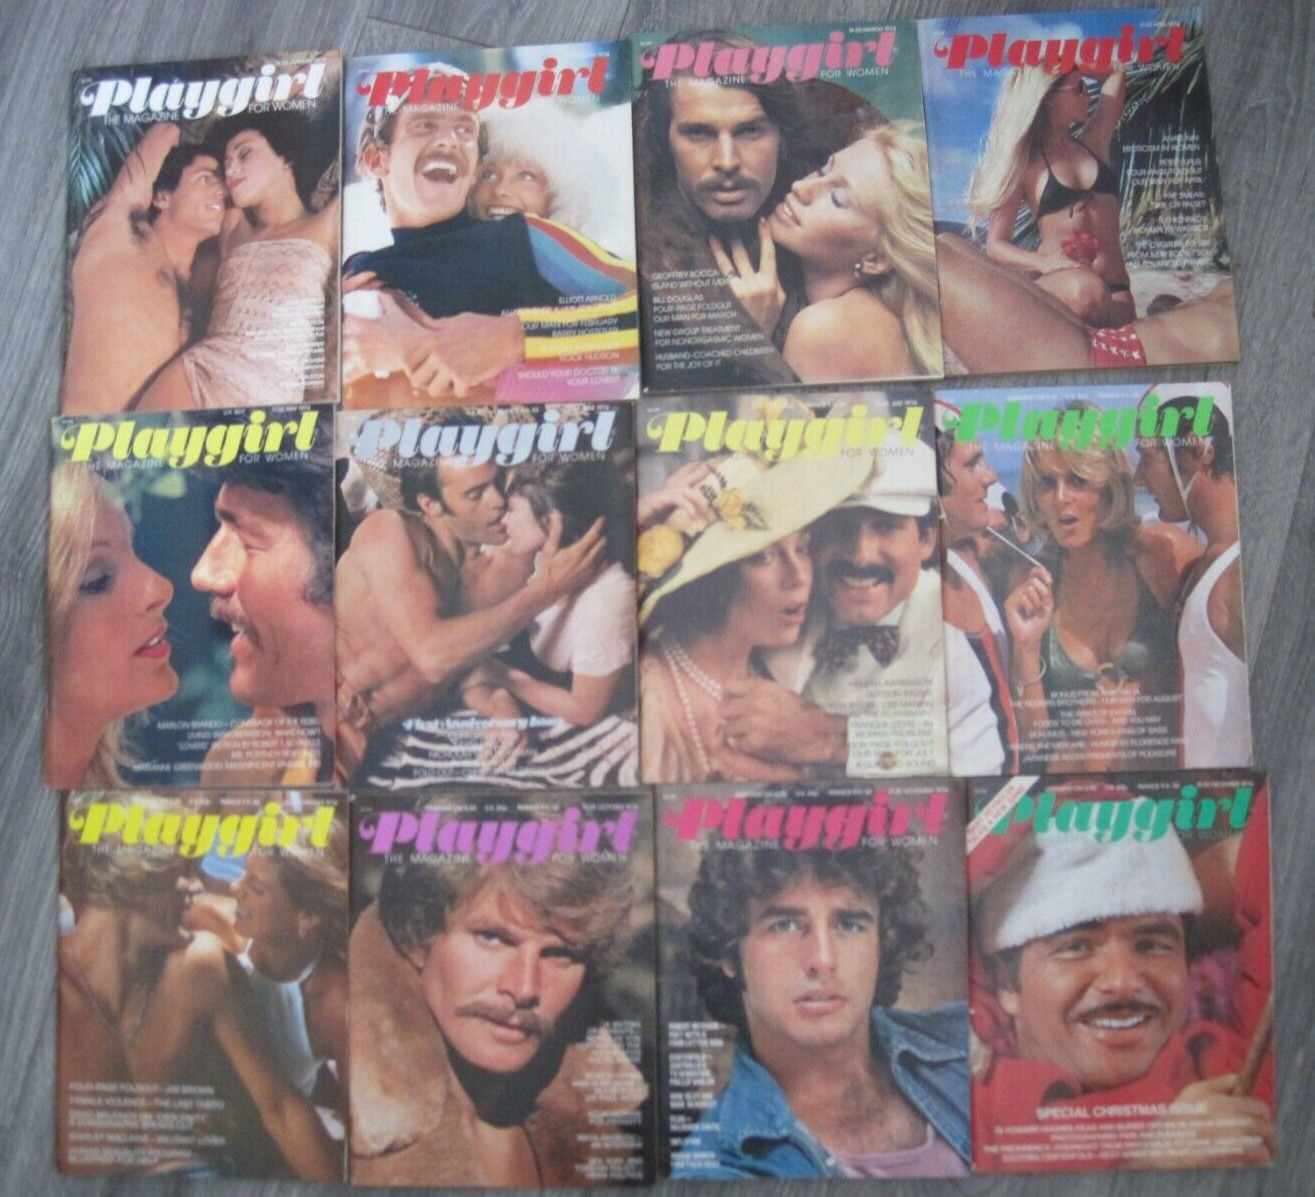 PLAYGIRL MAGAZINE FULL YEAR 1974 COMPLETE SET OF 12 ISSUES w Centerfolds